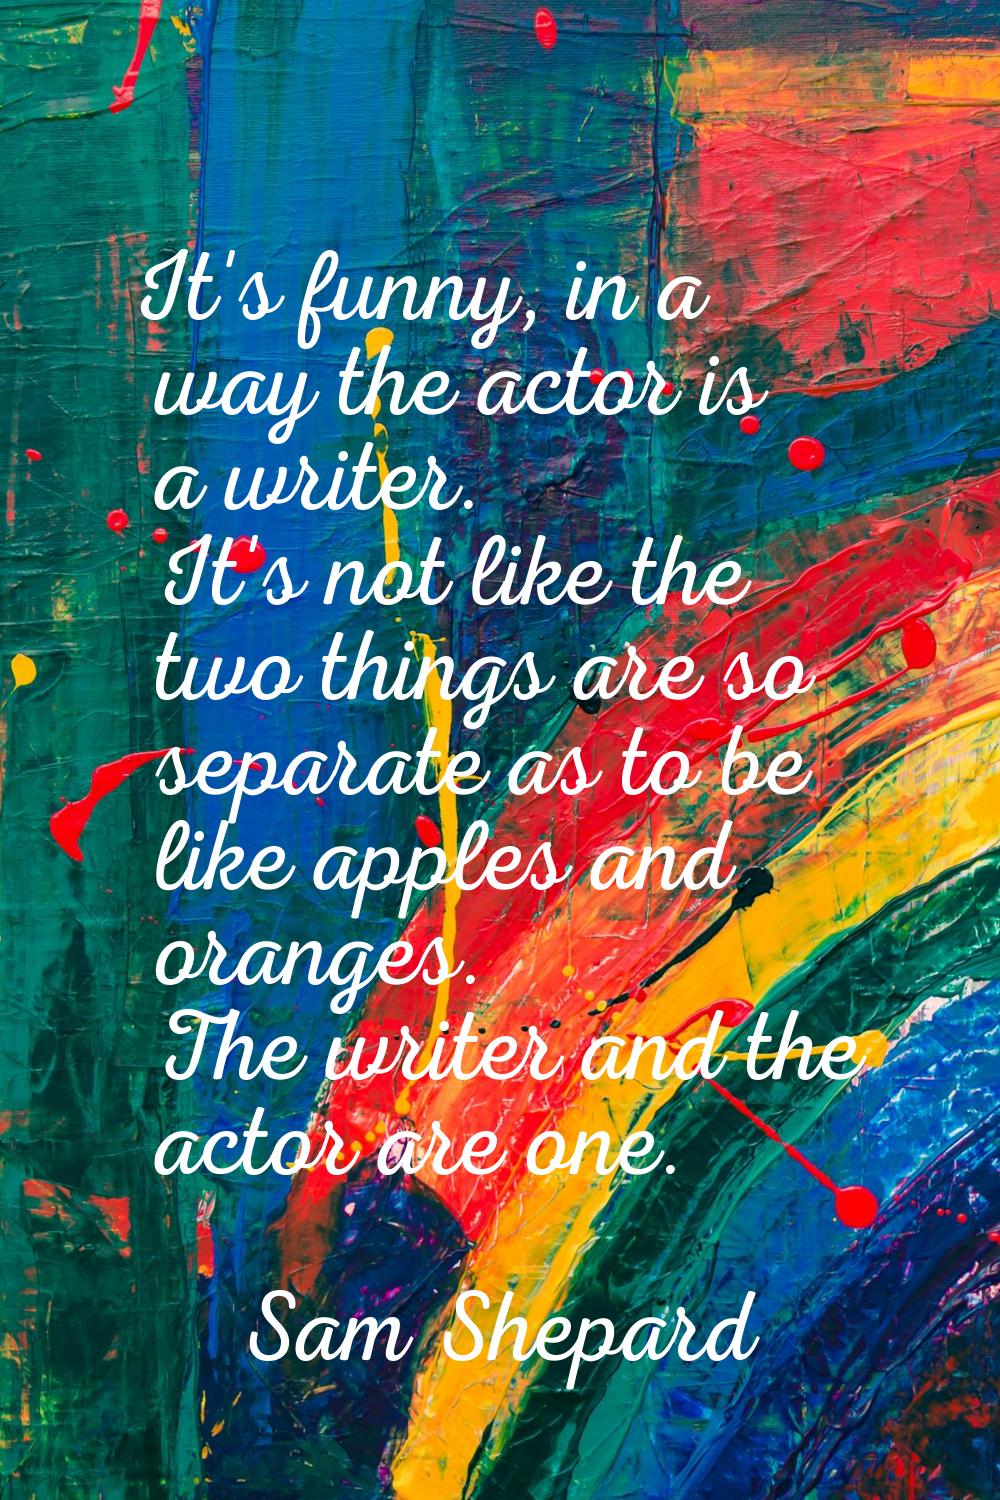 It's funny, in a way the actor is a writer. It's not like the two things are so separate as to be l